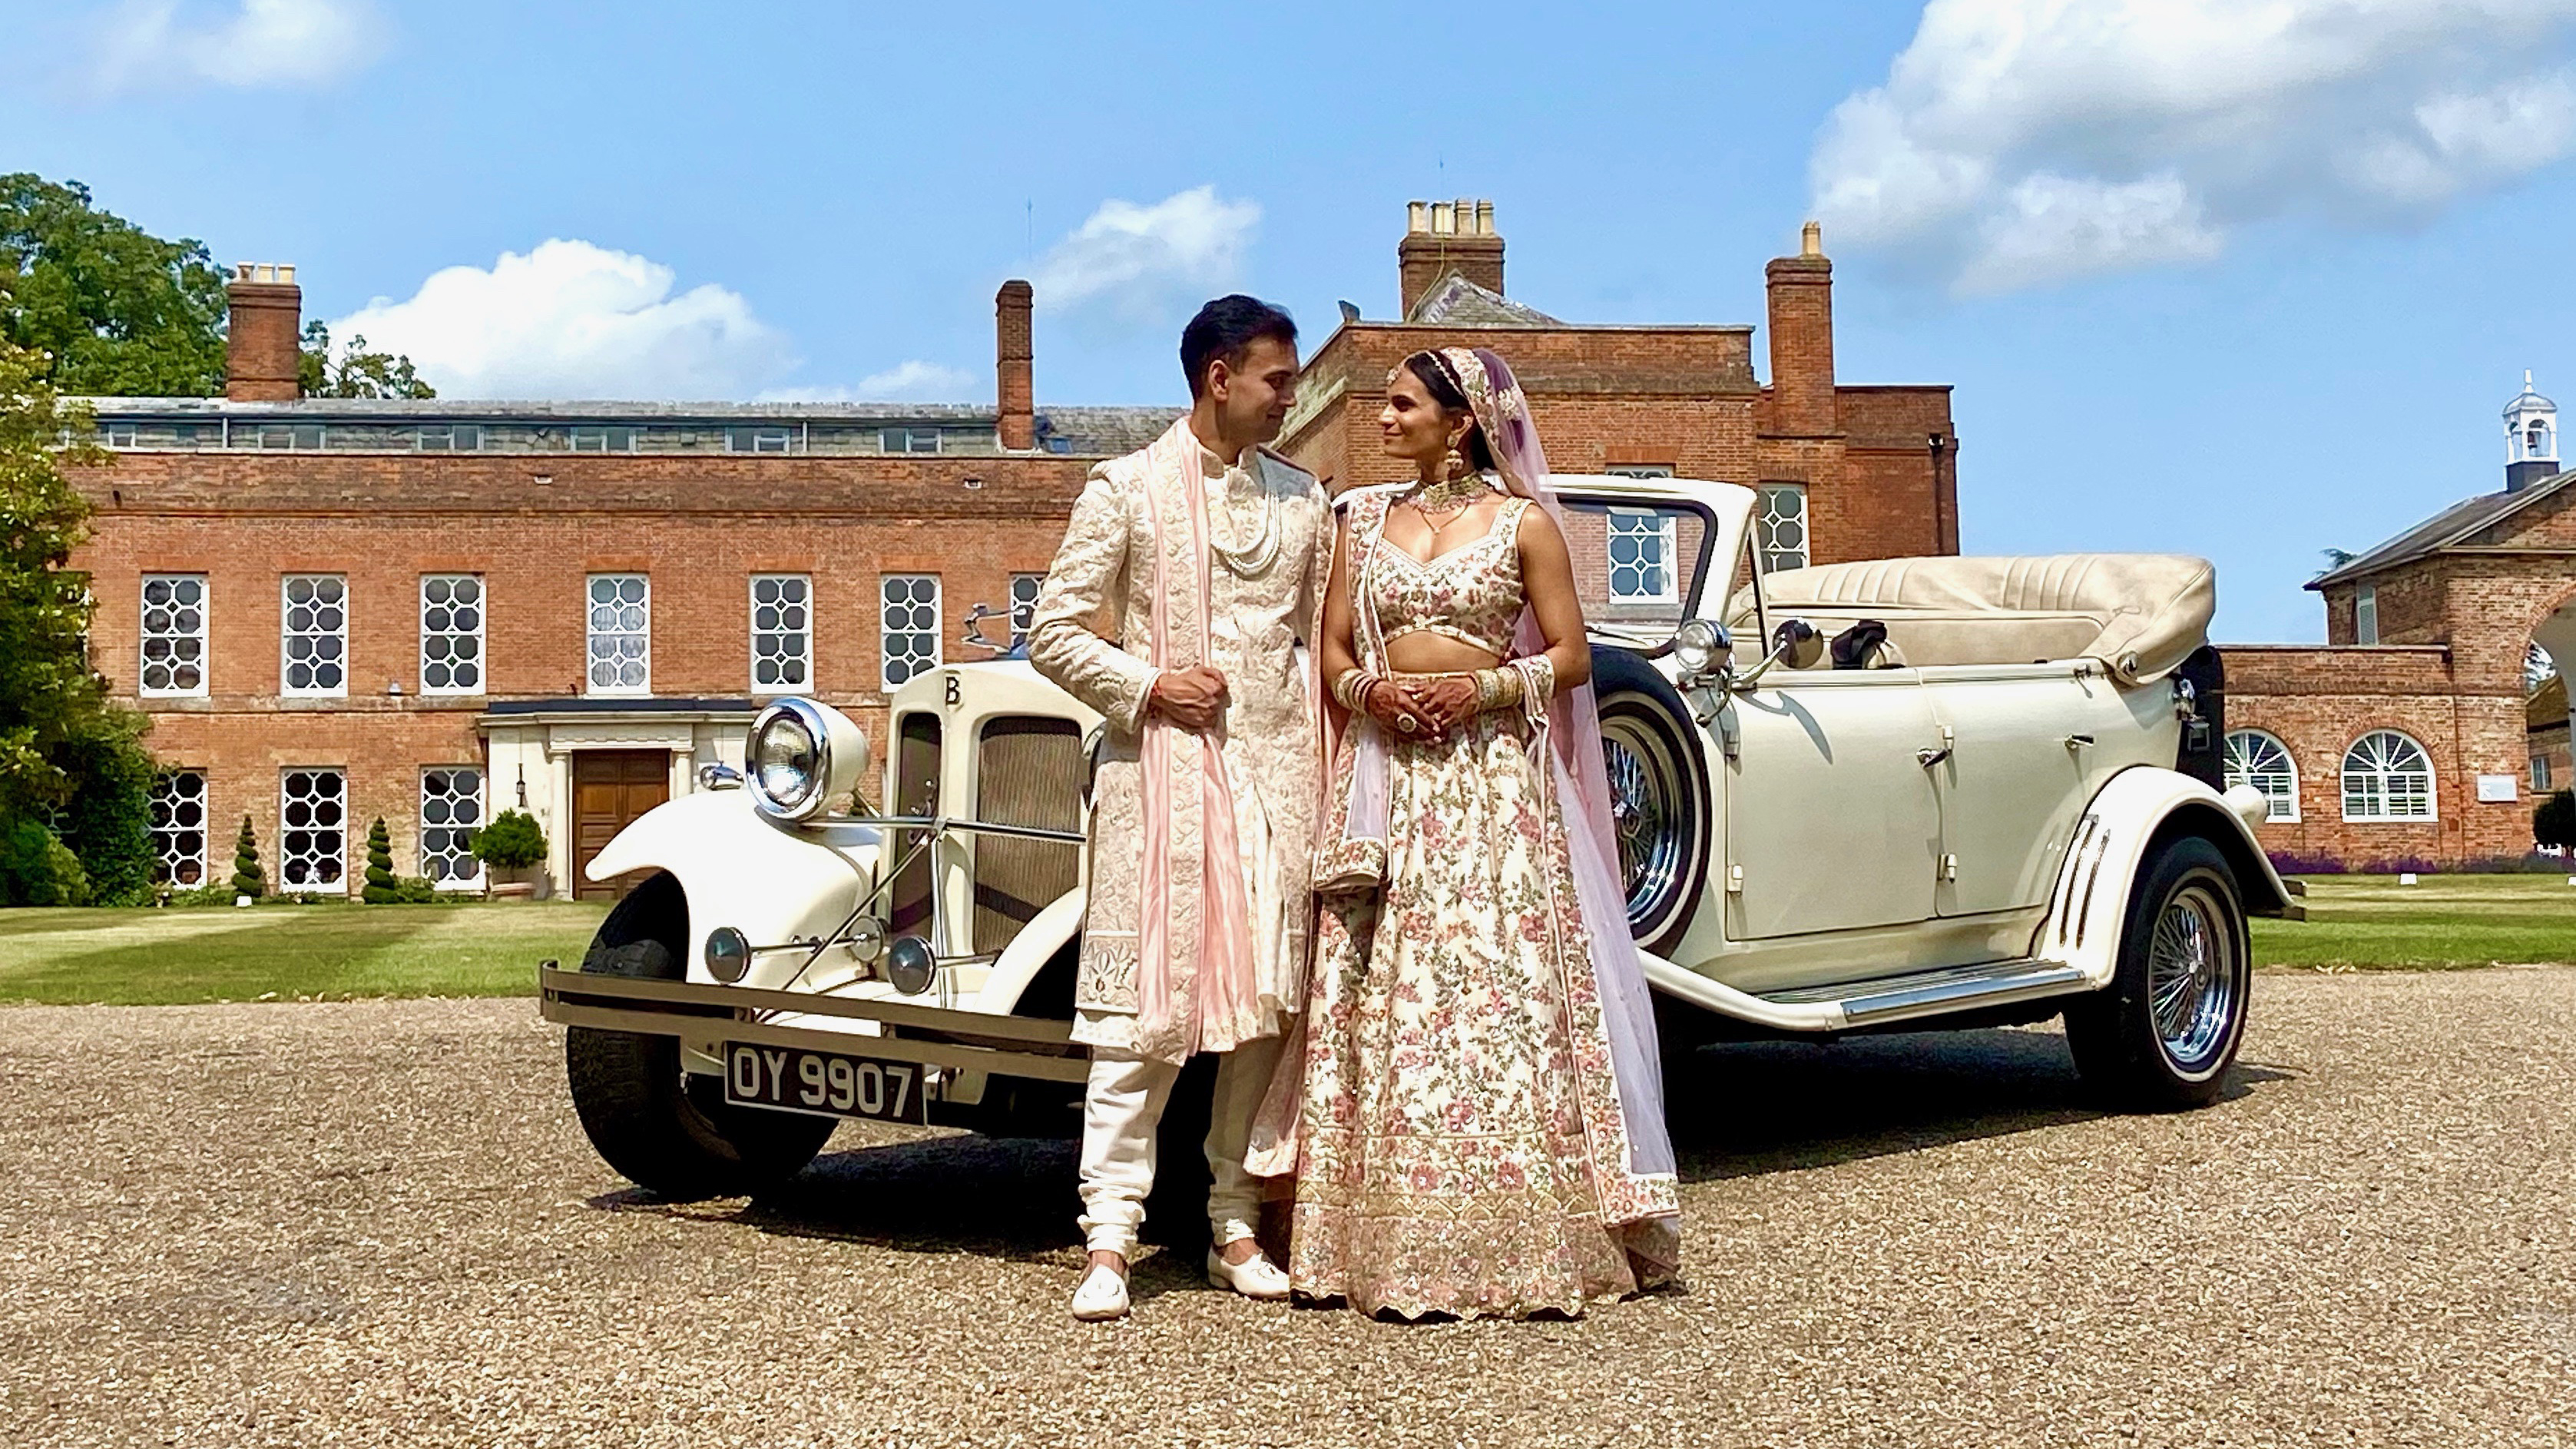 1930's vintage style Beauford in ivory with roof down. Asian Bride and Groom in their traditional outfit standing in front of the vehicle. Local Bedfordshire in the background.